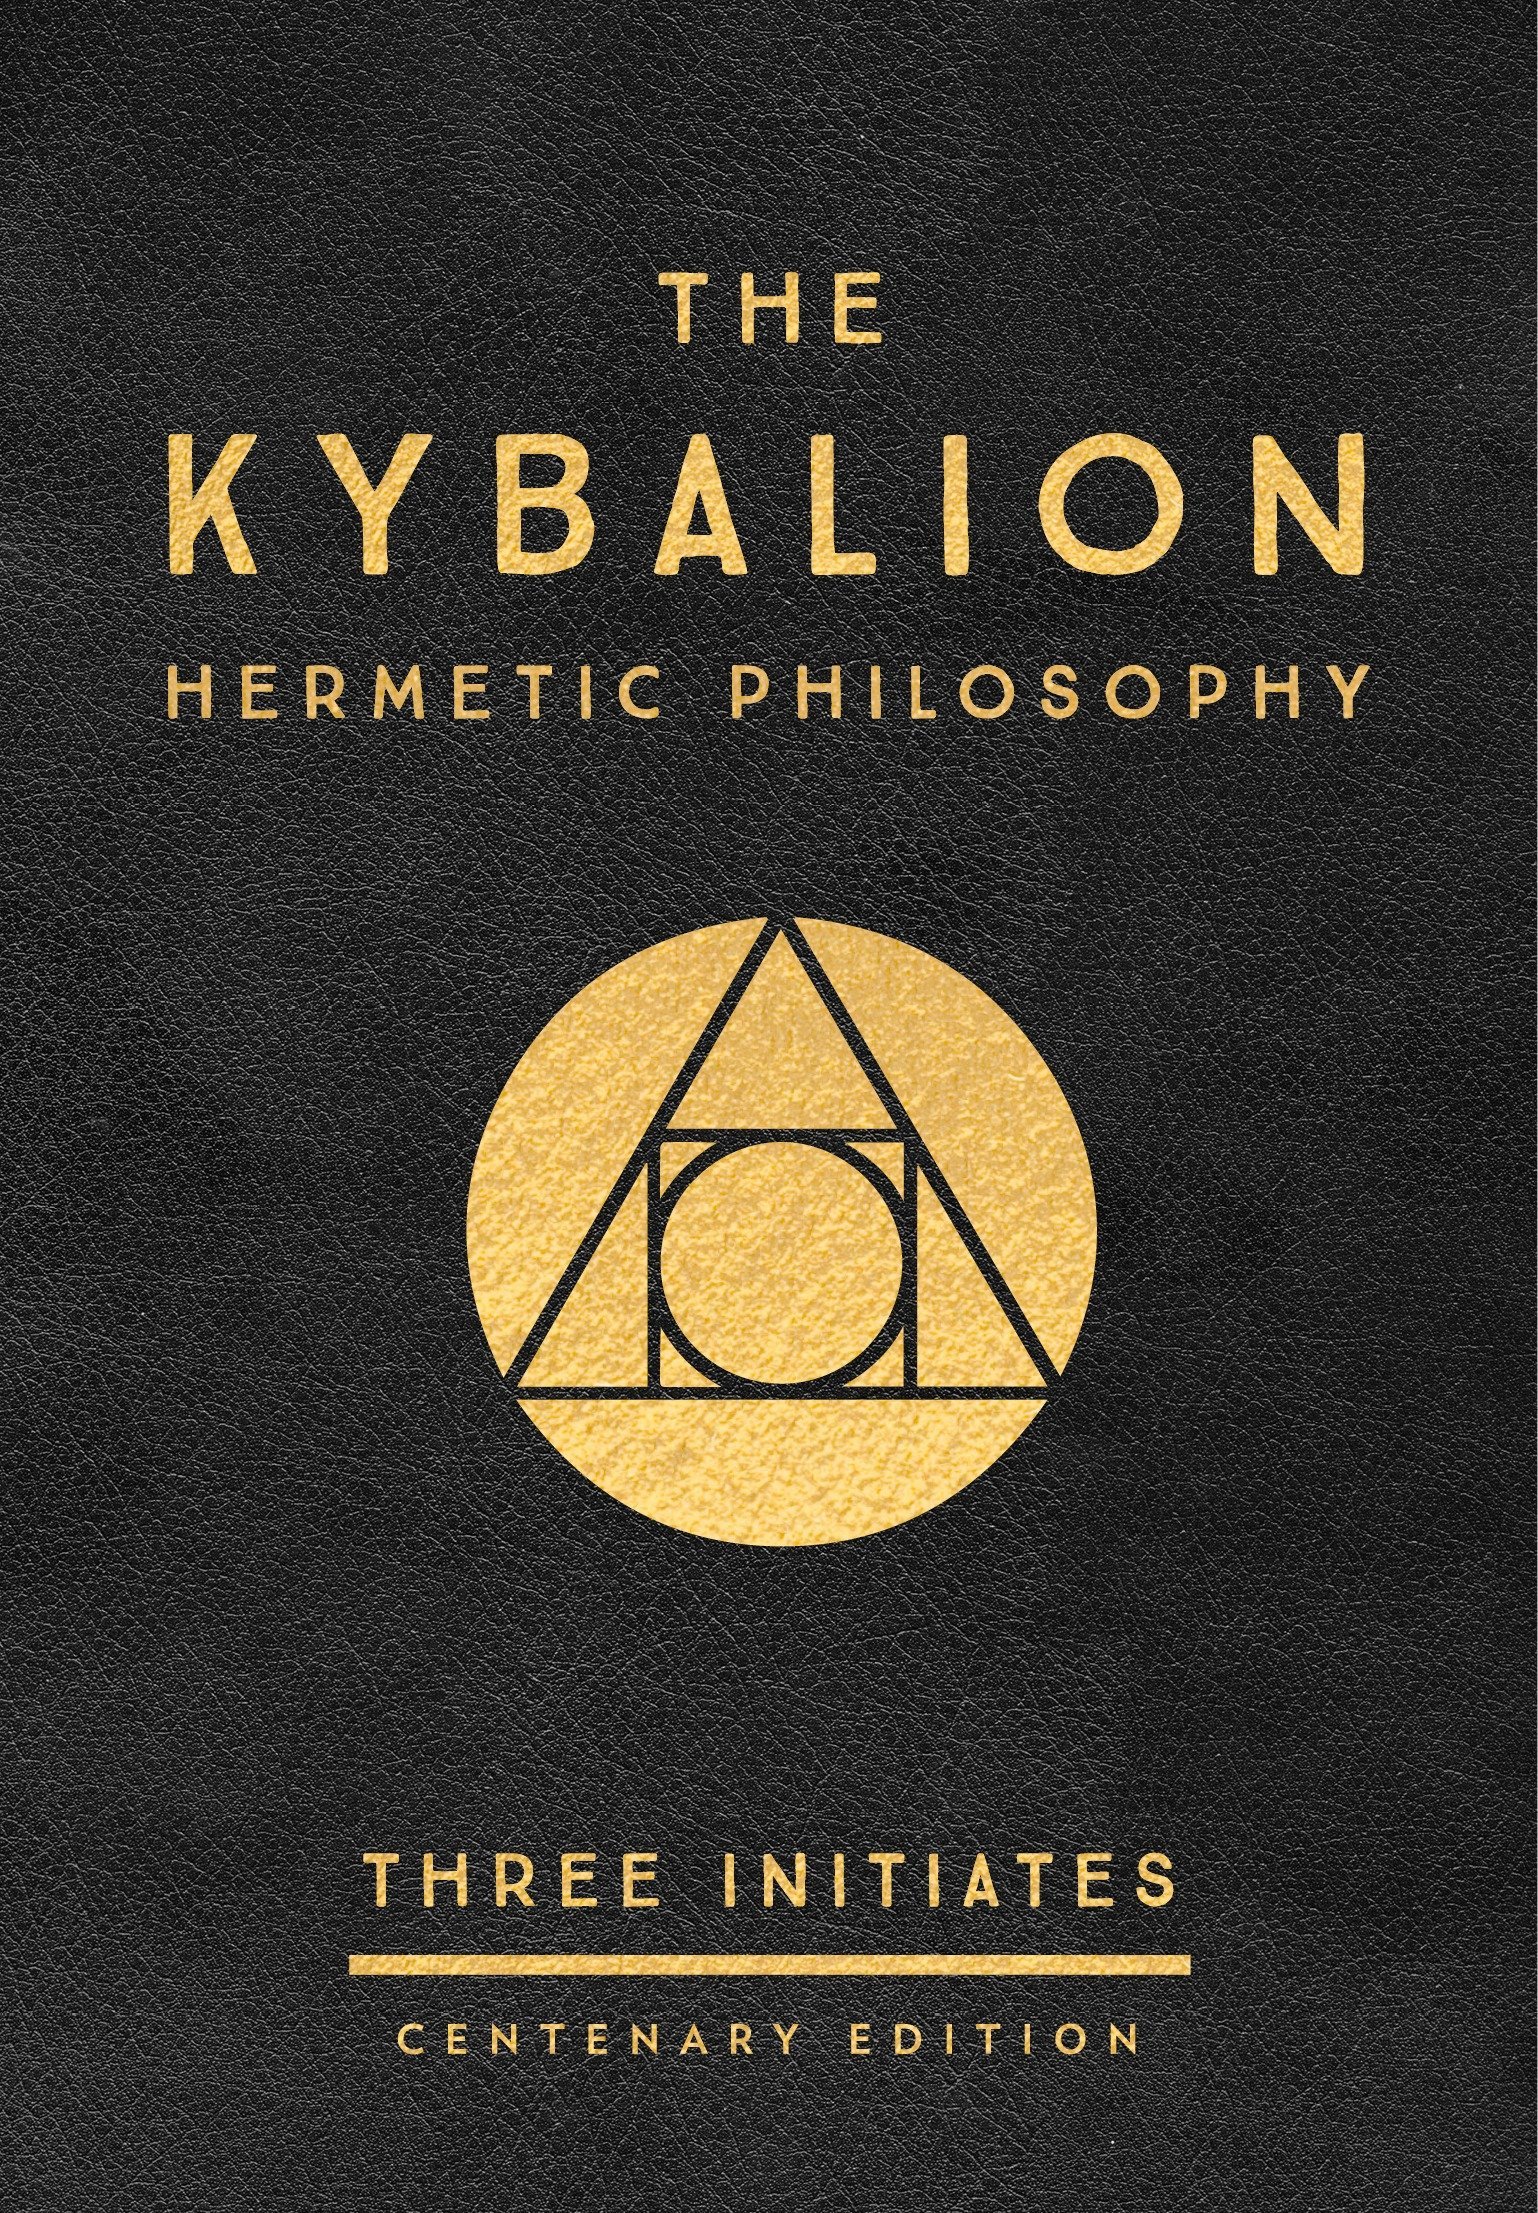 The Kybalion: Hermetic Philosophy (Copy) (Copy)